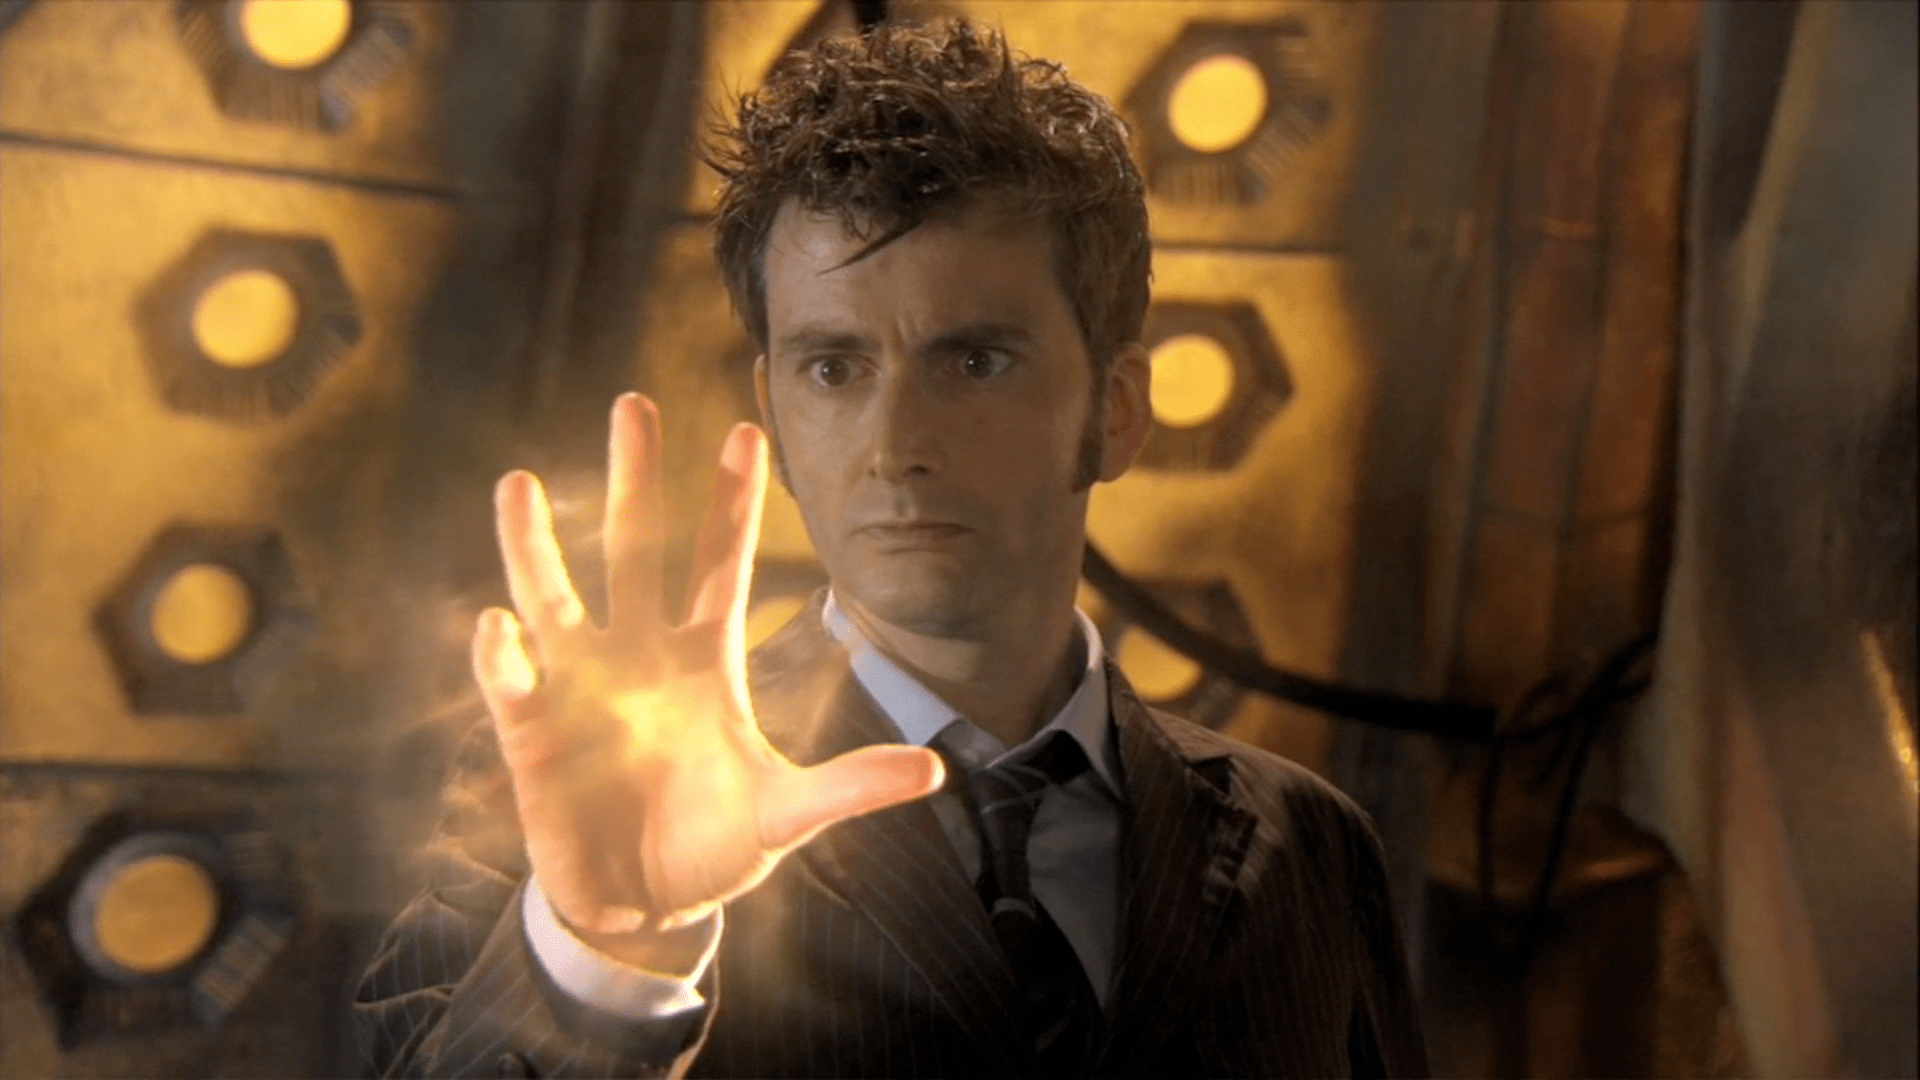 David Tennant's 10th Doctor regenerates in Doctor Who